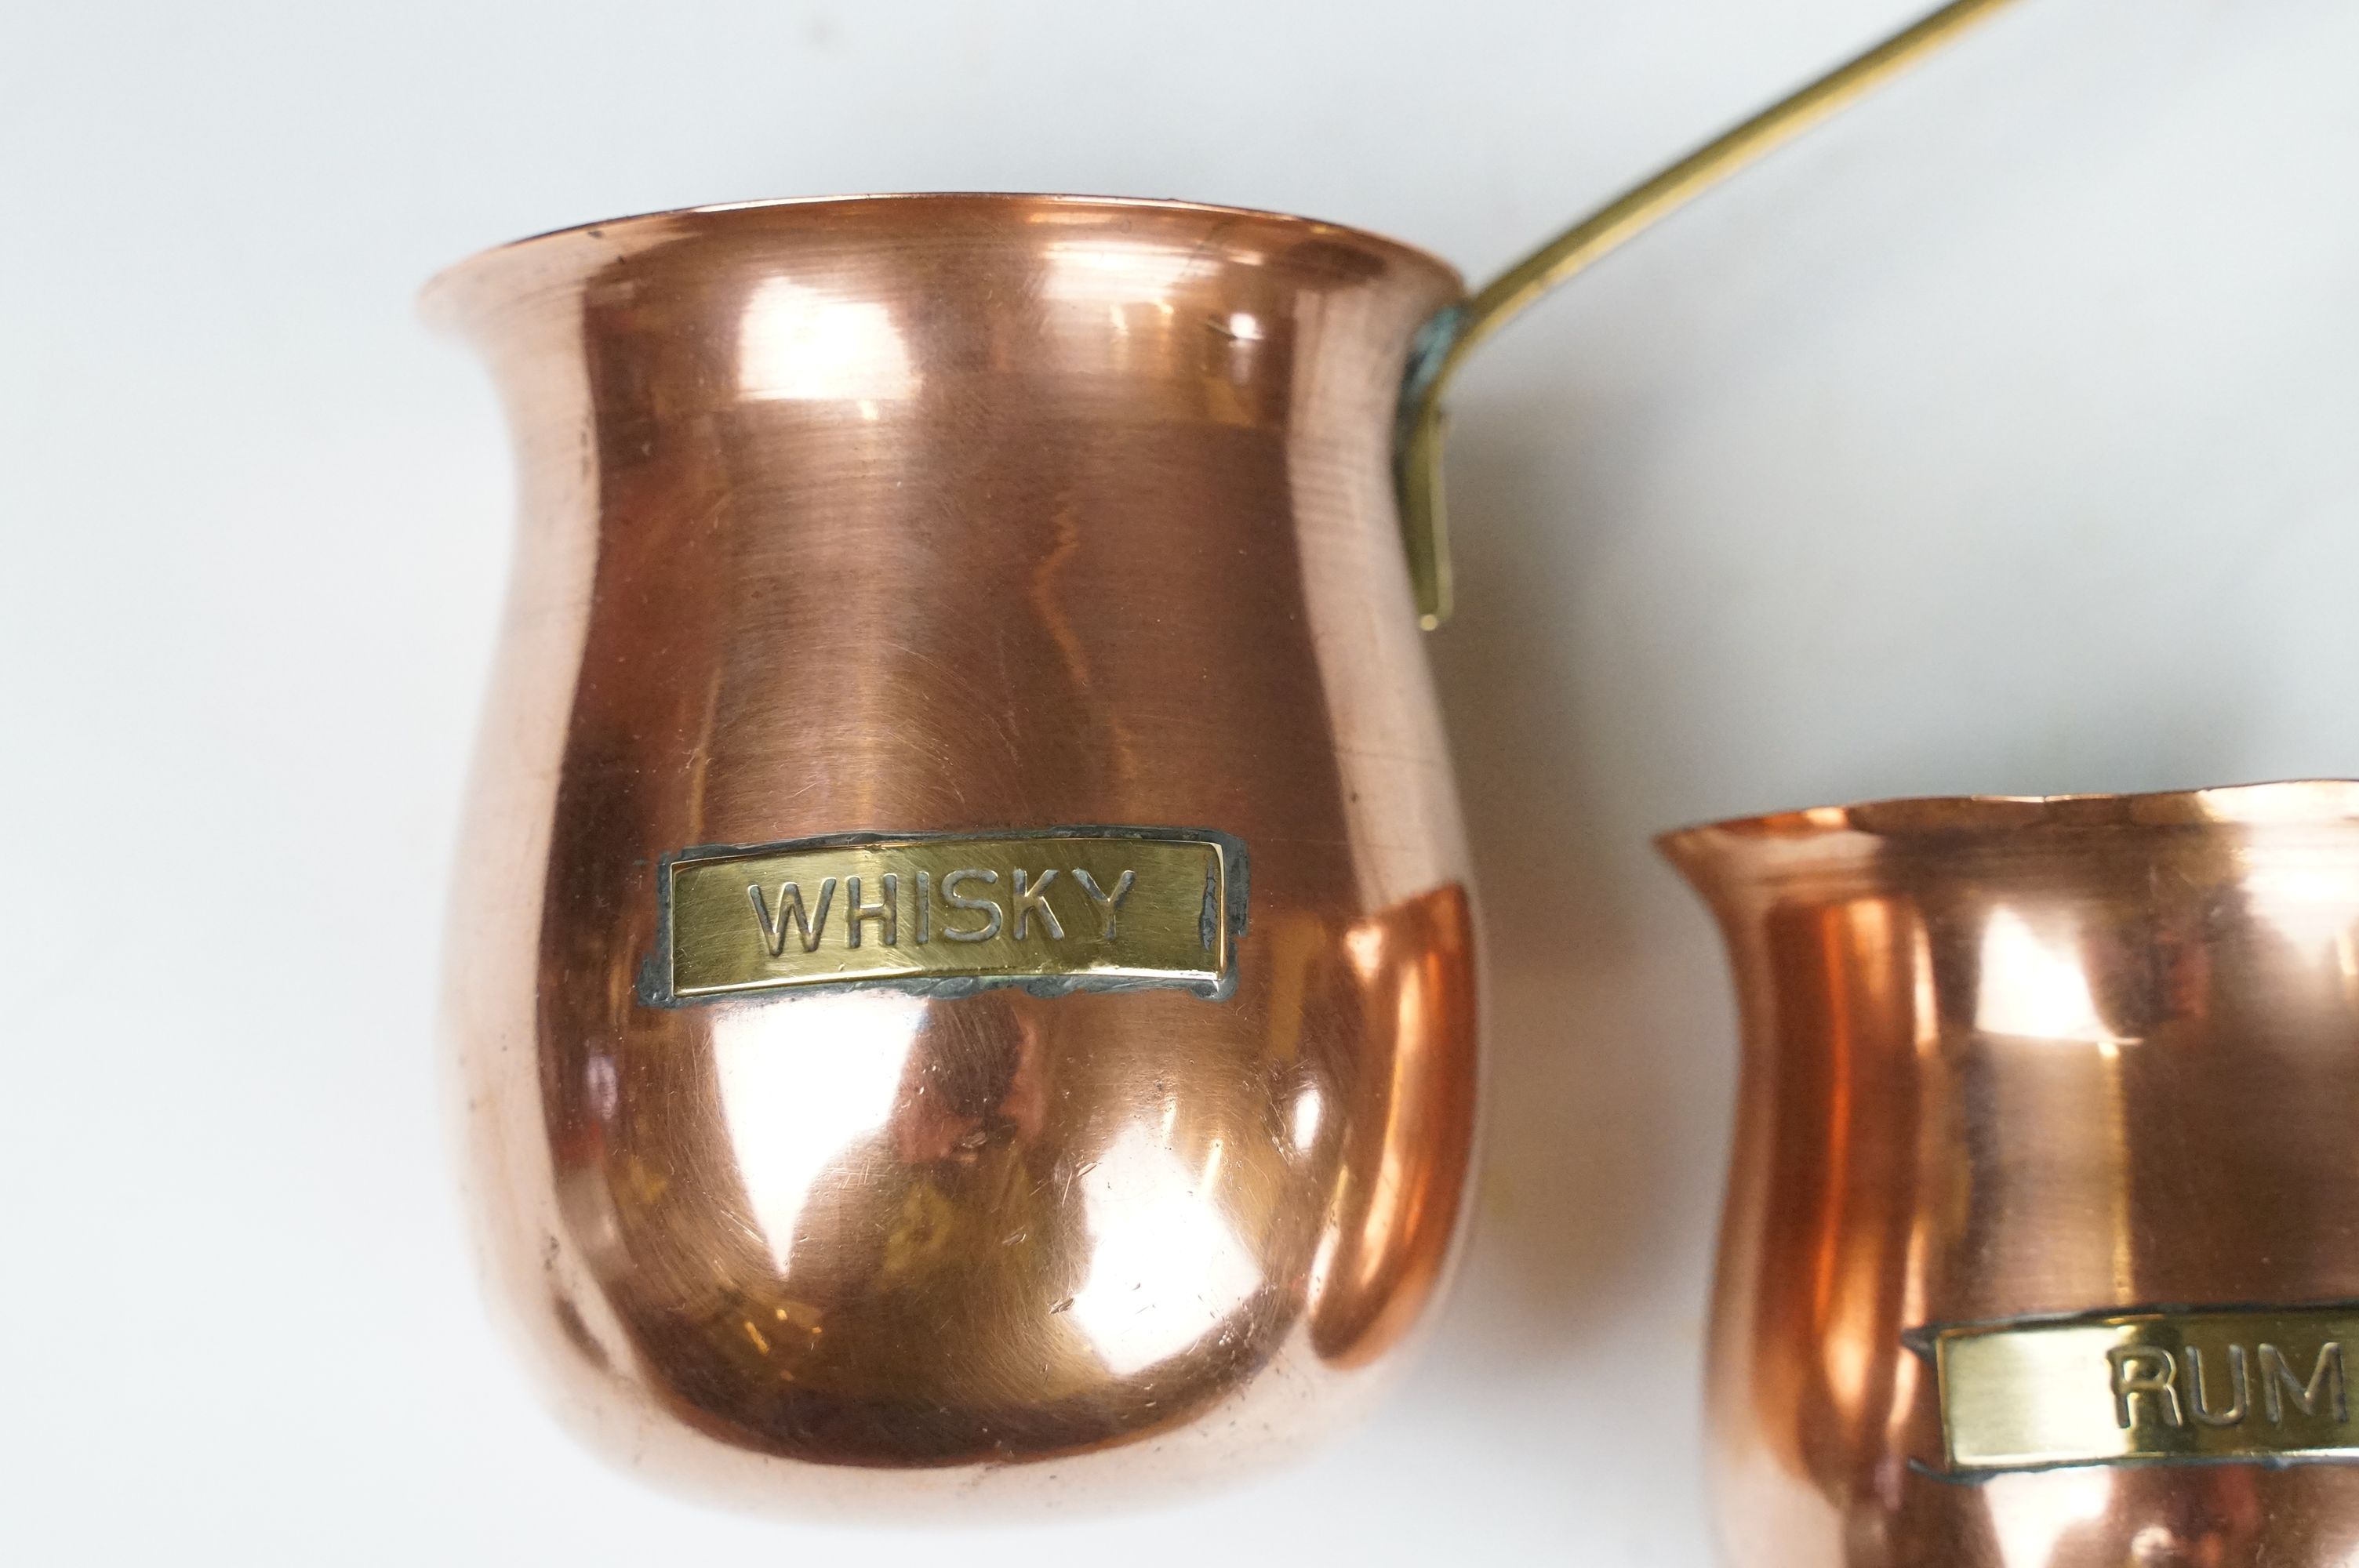 Set of Three Copper hanging graduating Spirit Measures including whisky, rum and brandy, longest - Image 2 of 7